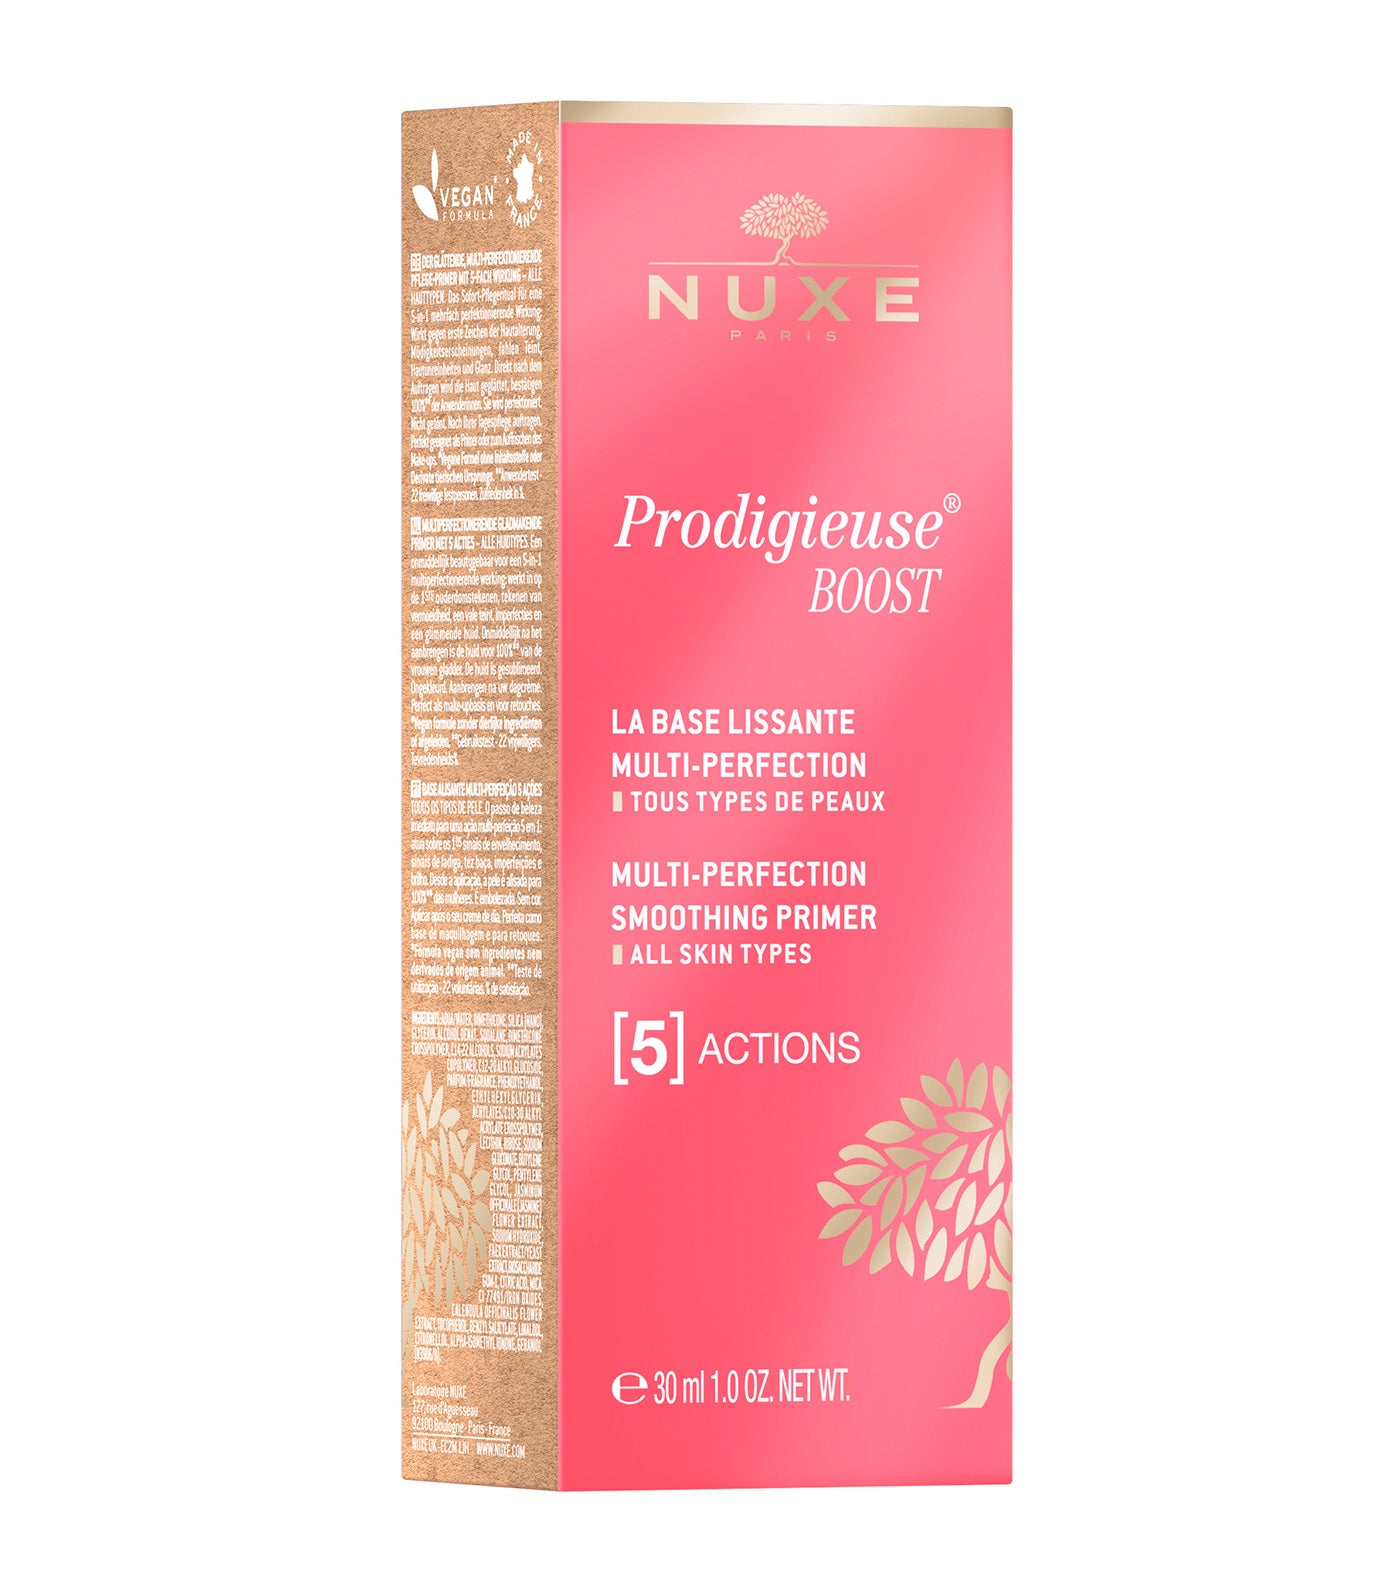 Prodigieuse Boost® 5-in-1 Multi-Perfection Smoothing Primer